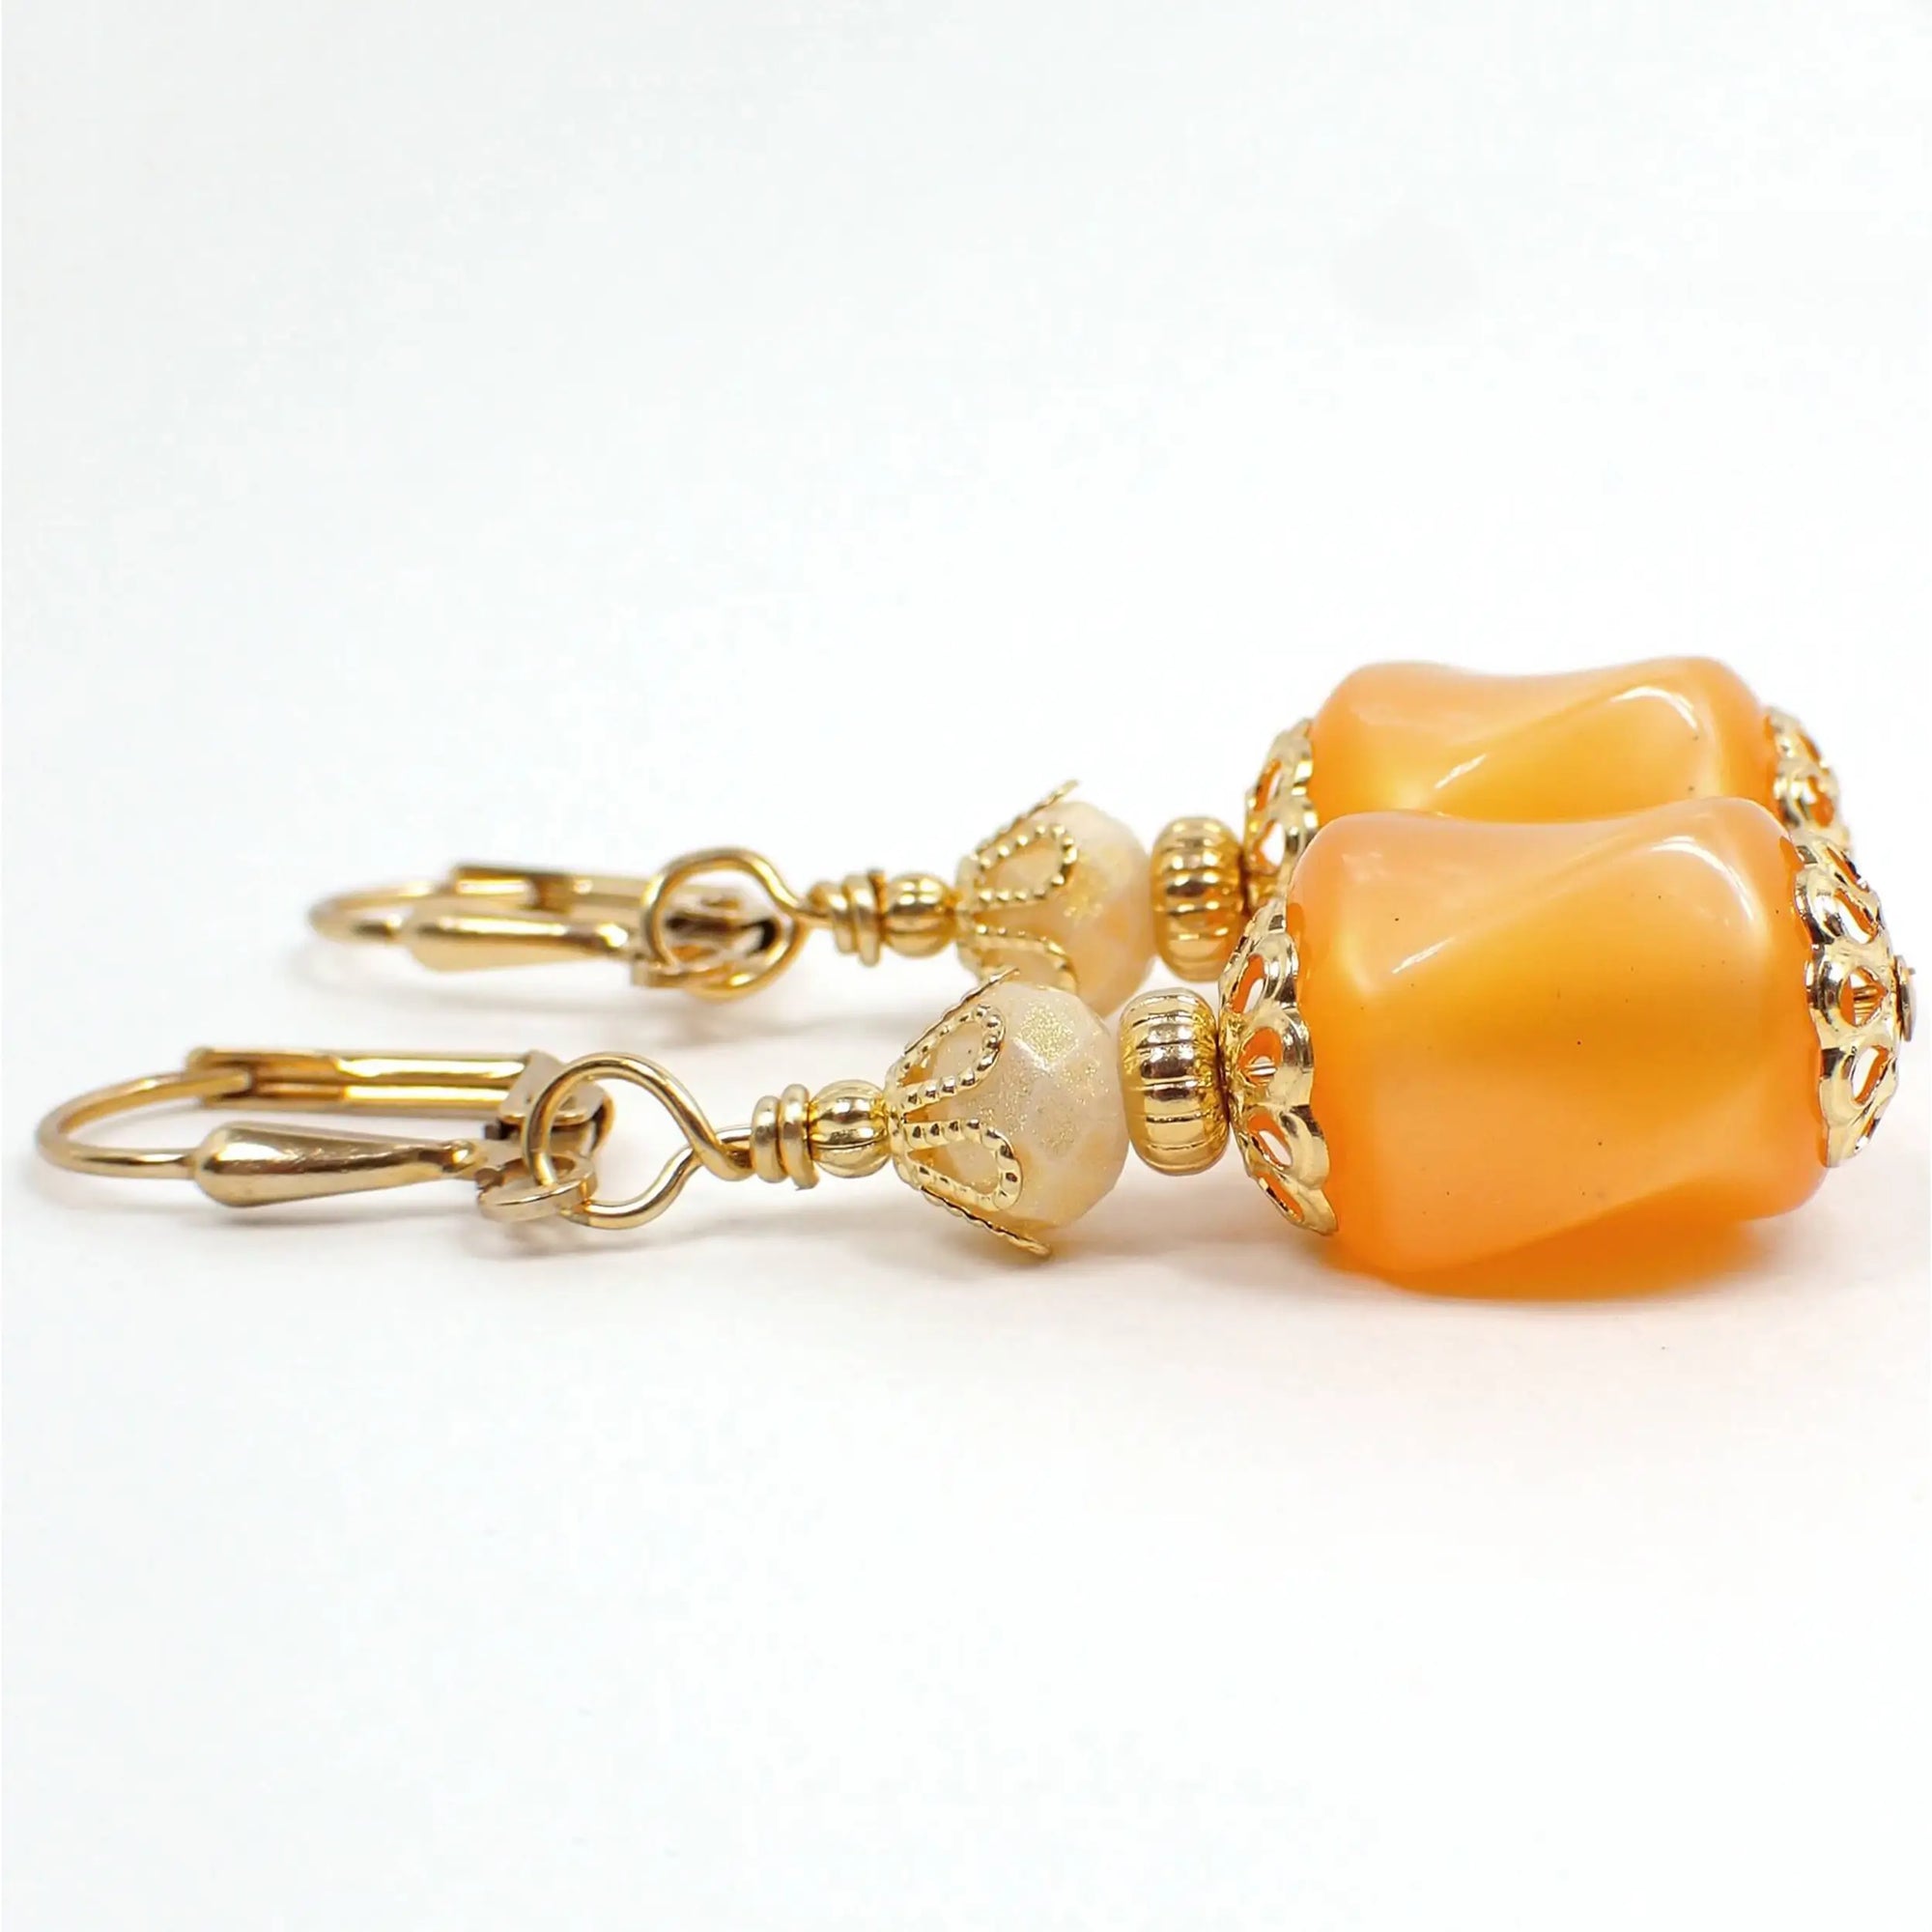 Side view of the handmade drop earrings. The metal is gold plated in color. There are new faceted glass crystal beads at the top that are off white with a light golden sheen on them. The bottom beads are vintage moonglow lucite beads in peach color. They are twisted barrel shaped and have an inner glowy like appearance as you move around in the light.